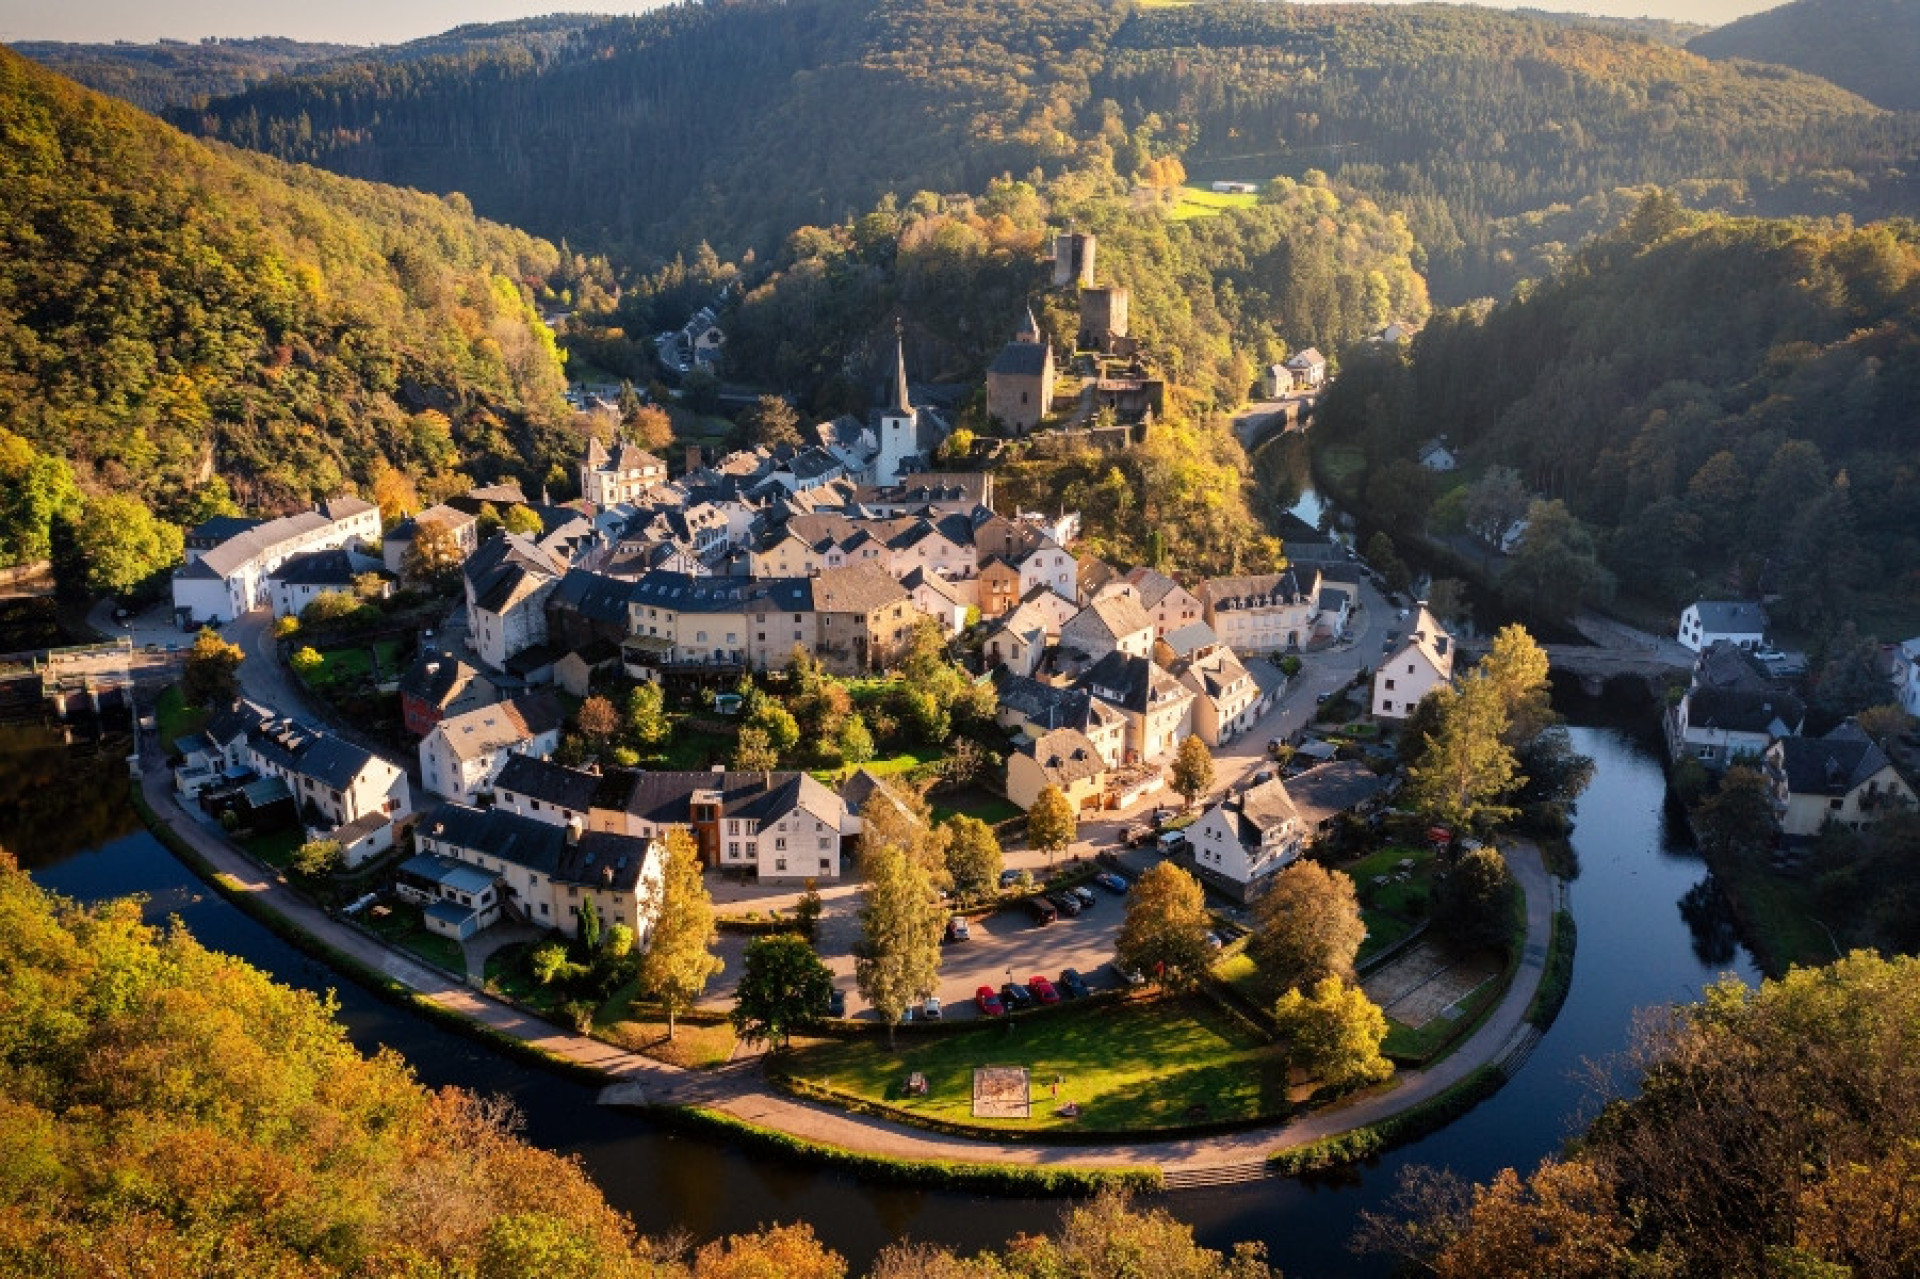 <p>Despite its small size, Luxembourg has a fantastic healthcare system and rich economy that benefits enormously from the EU, allowing its people to live longer and more prosperous lives. The strides Luxembourg has made highlights its effective health policies and improved quality of life.</p><p>You may also like:<a href="https://www.starsinsider.com/n/324269?utm_source=msn.com&utm_medium=display&utm_campaign=referral_description&utm_content=582401en-en"> Celine Dion's shocking new look</a></p>